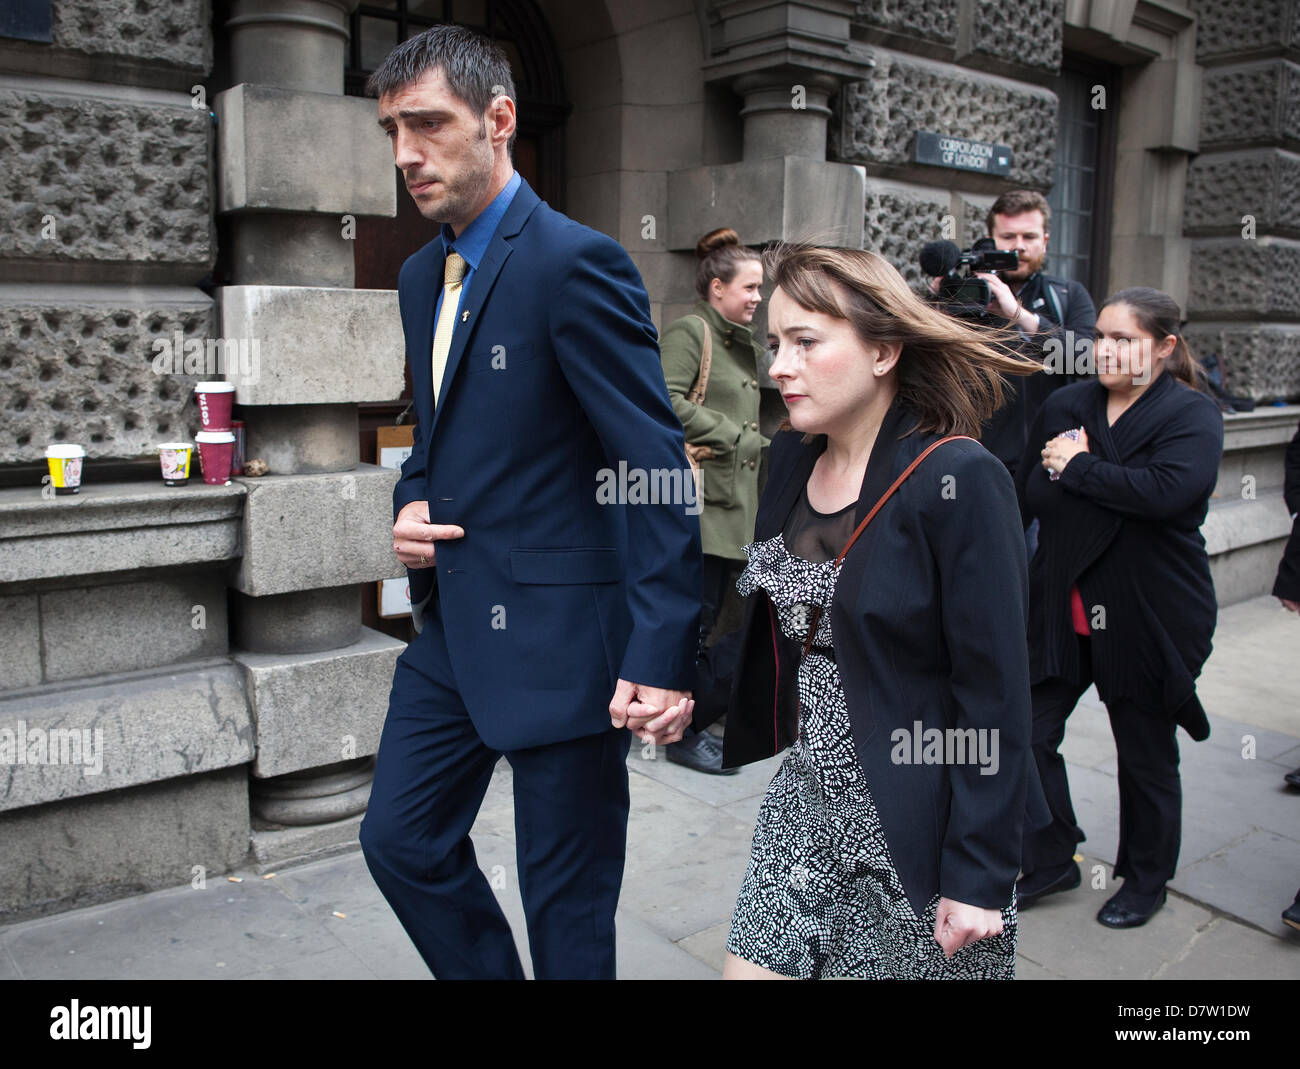 The Old Bailey, London, UK. 14th May 2013.   Picture shows Steven Carter the biological father of Tia Sharp  leaving the court after Stuart Hazell is jailed for 38 years. Stuart Hazell has been jailed for life with a minimum term of 38 years after finally admitting the murder of schoolgirl Tia Sharp. Credit: Jeff Gilbert/Alamy Live News Stock Photo